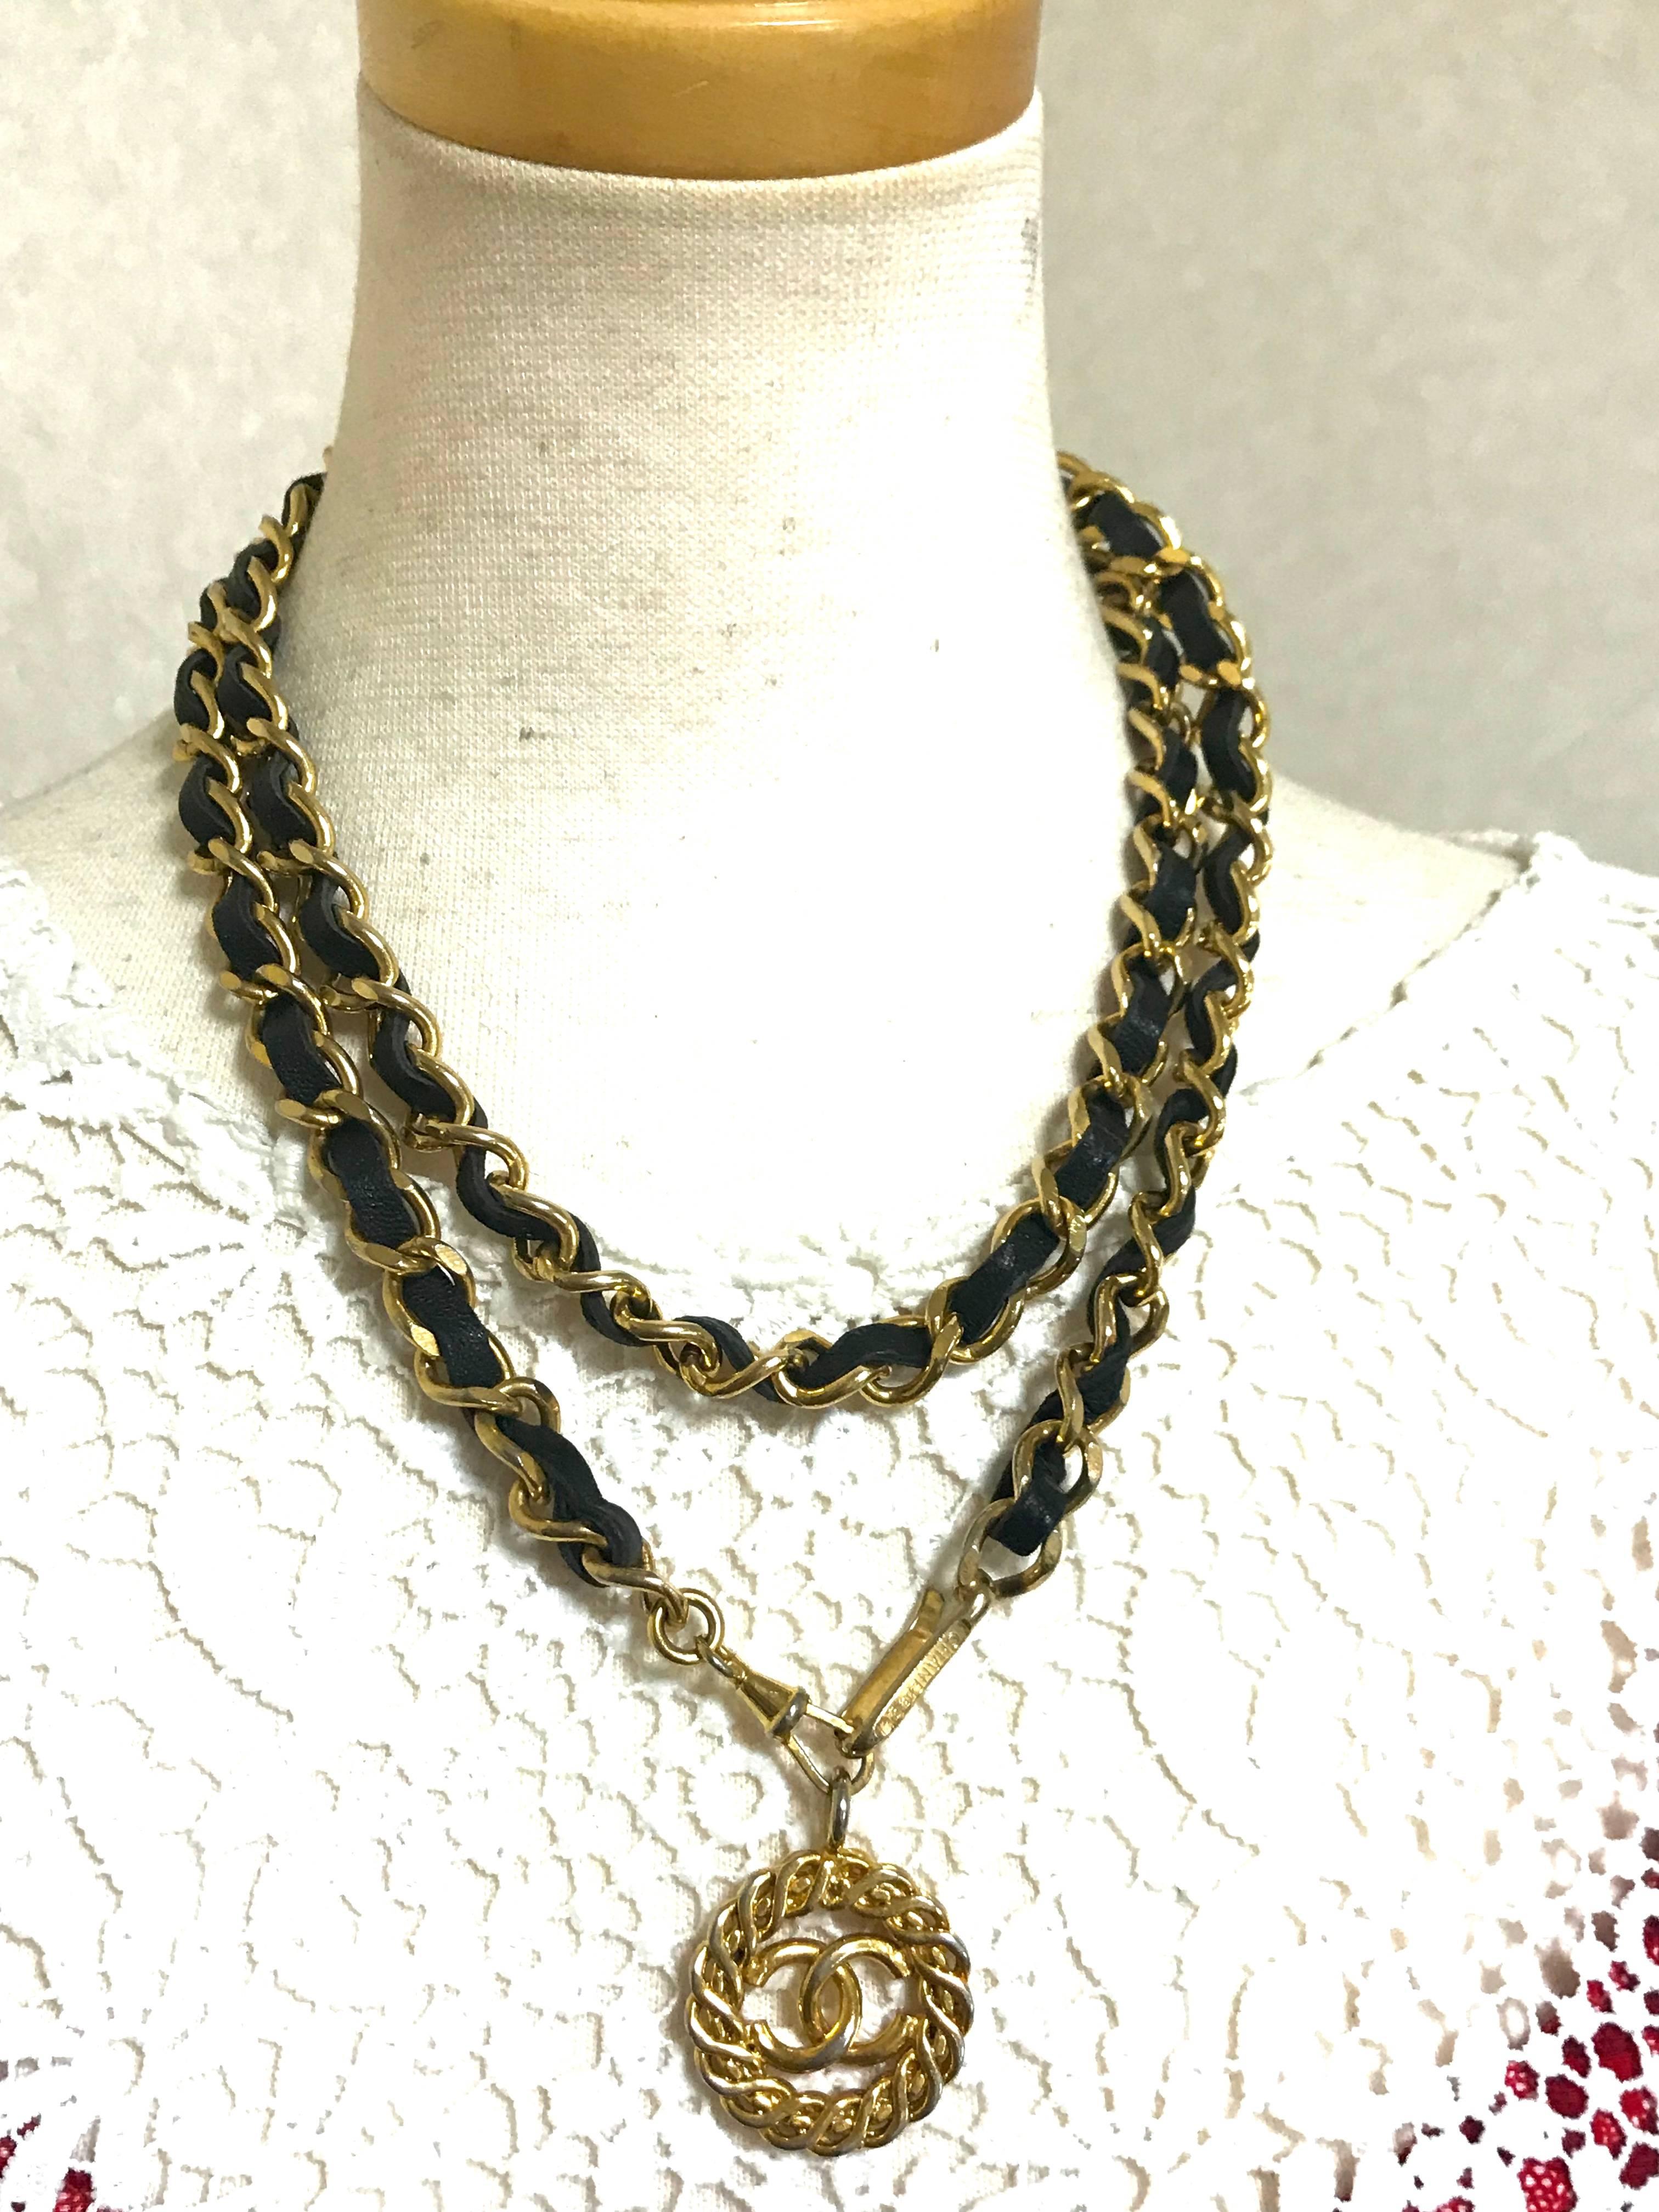 Black Vintage CHANEL golden chain and black belt/necklace with flower CC mark charm. 